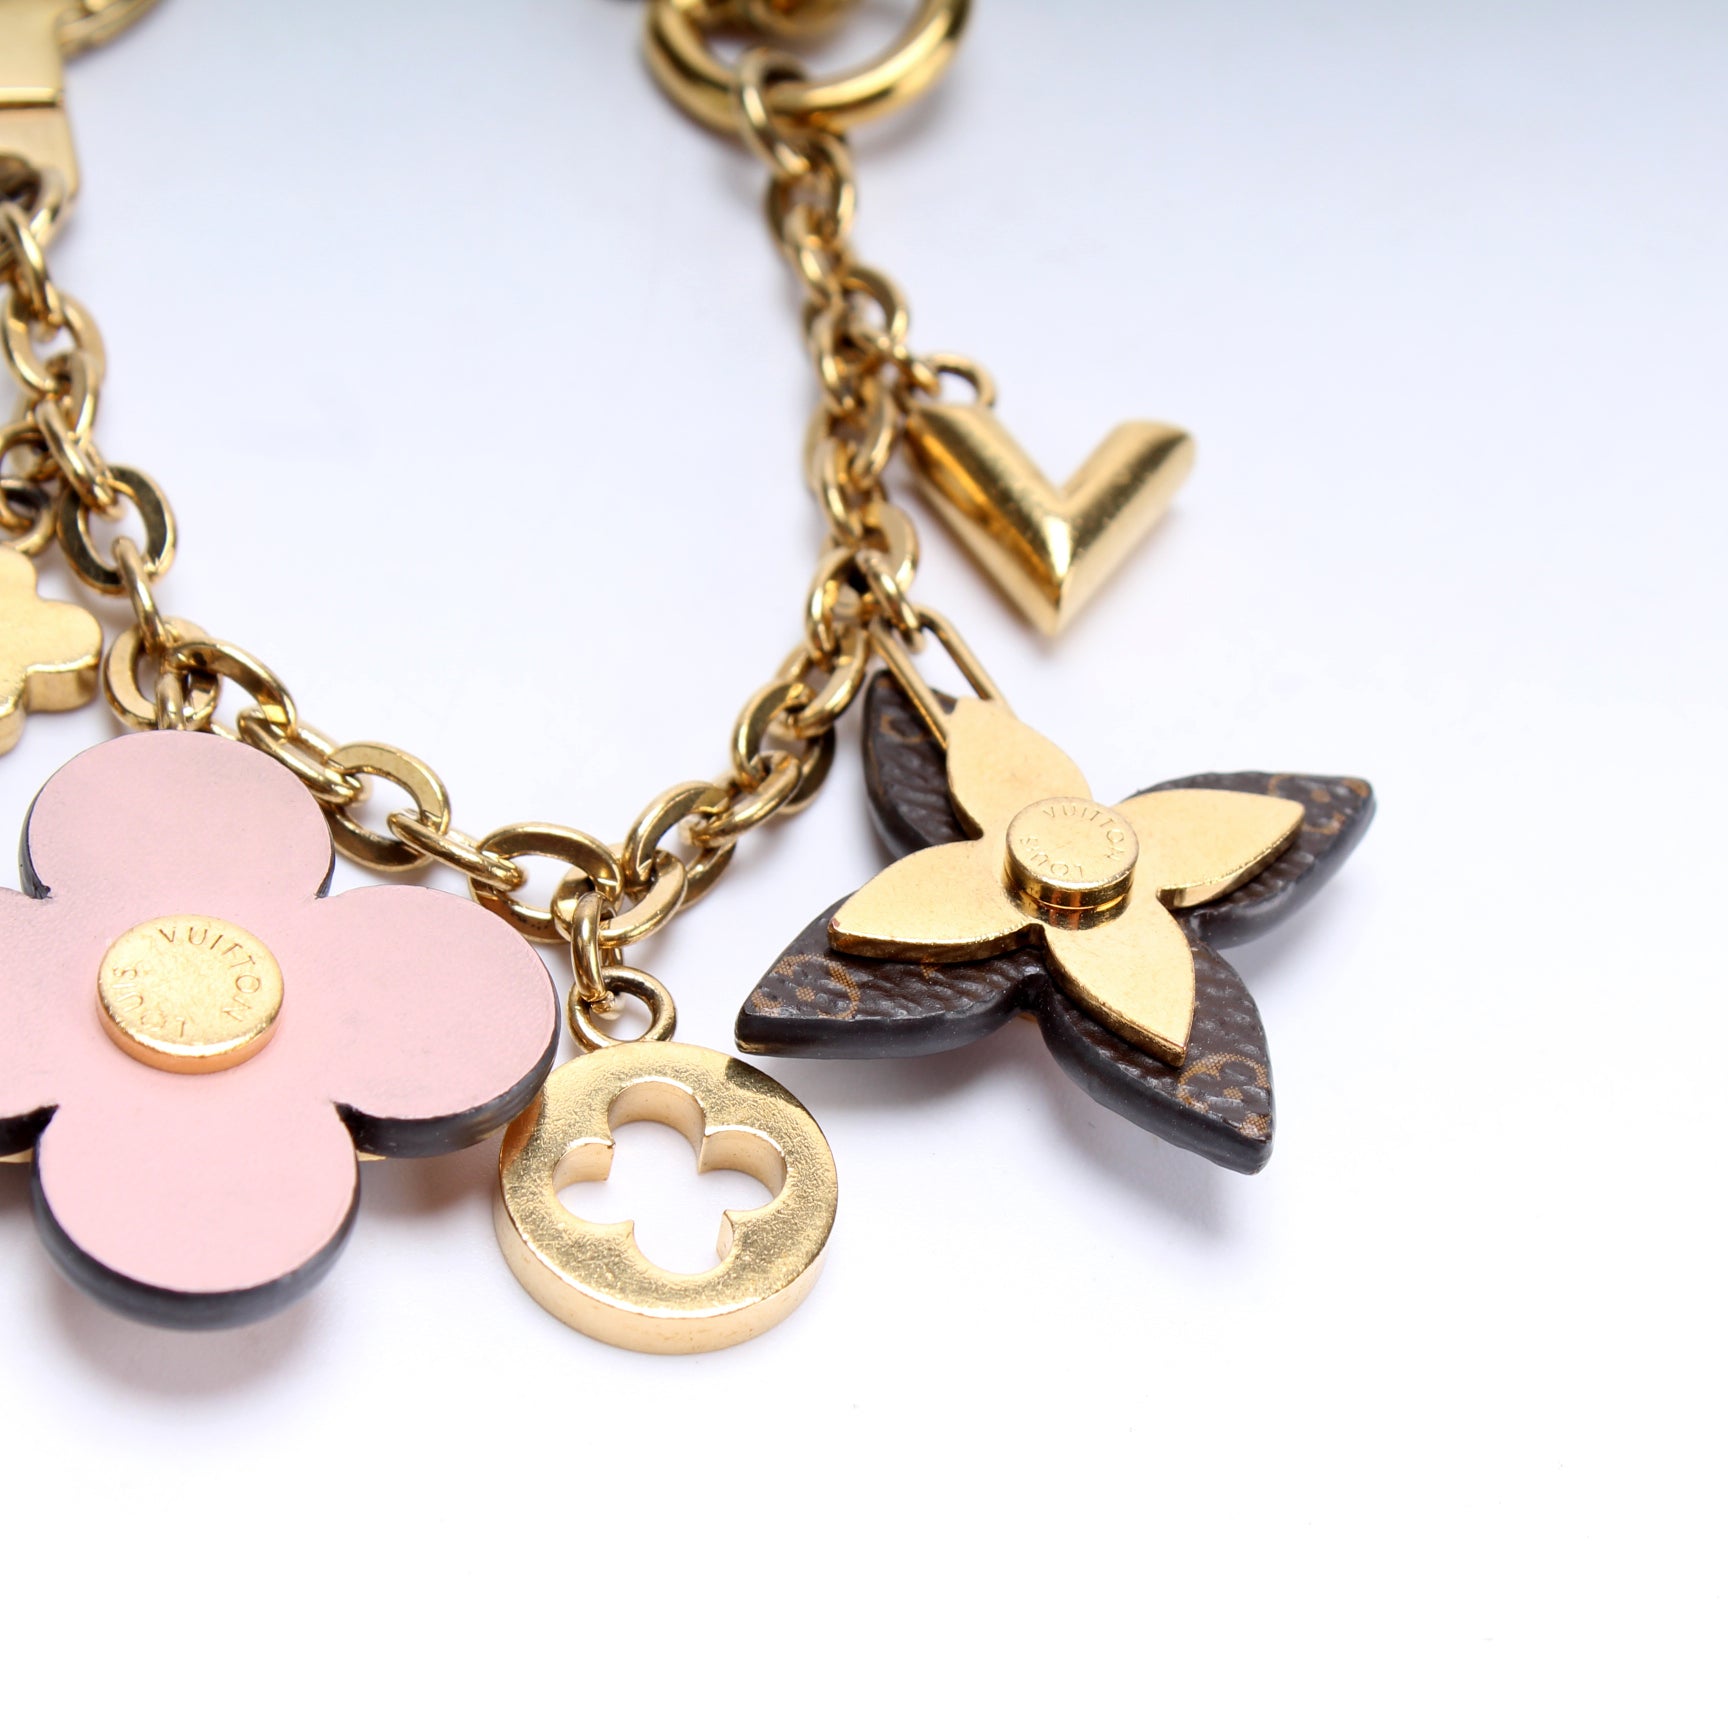 Louis Vuitton Blooming Flowers BB Bag Charm and Key Holder